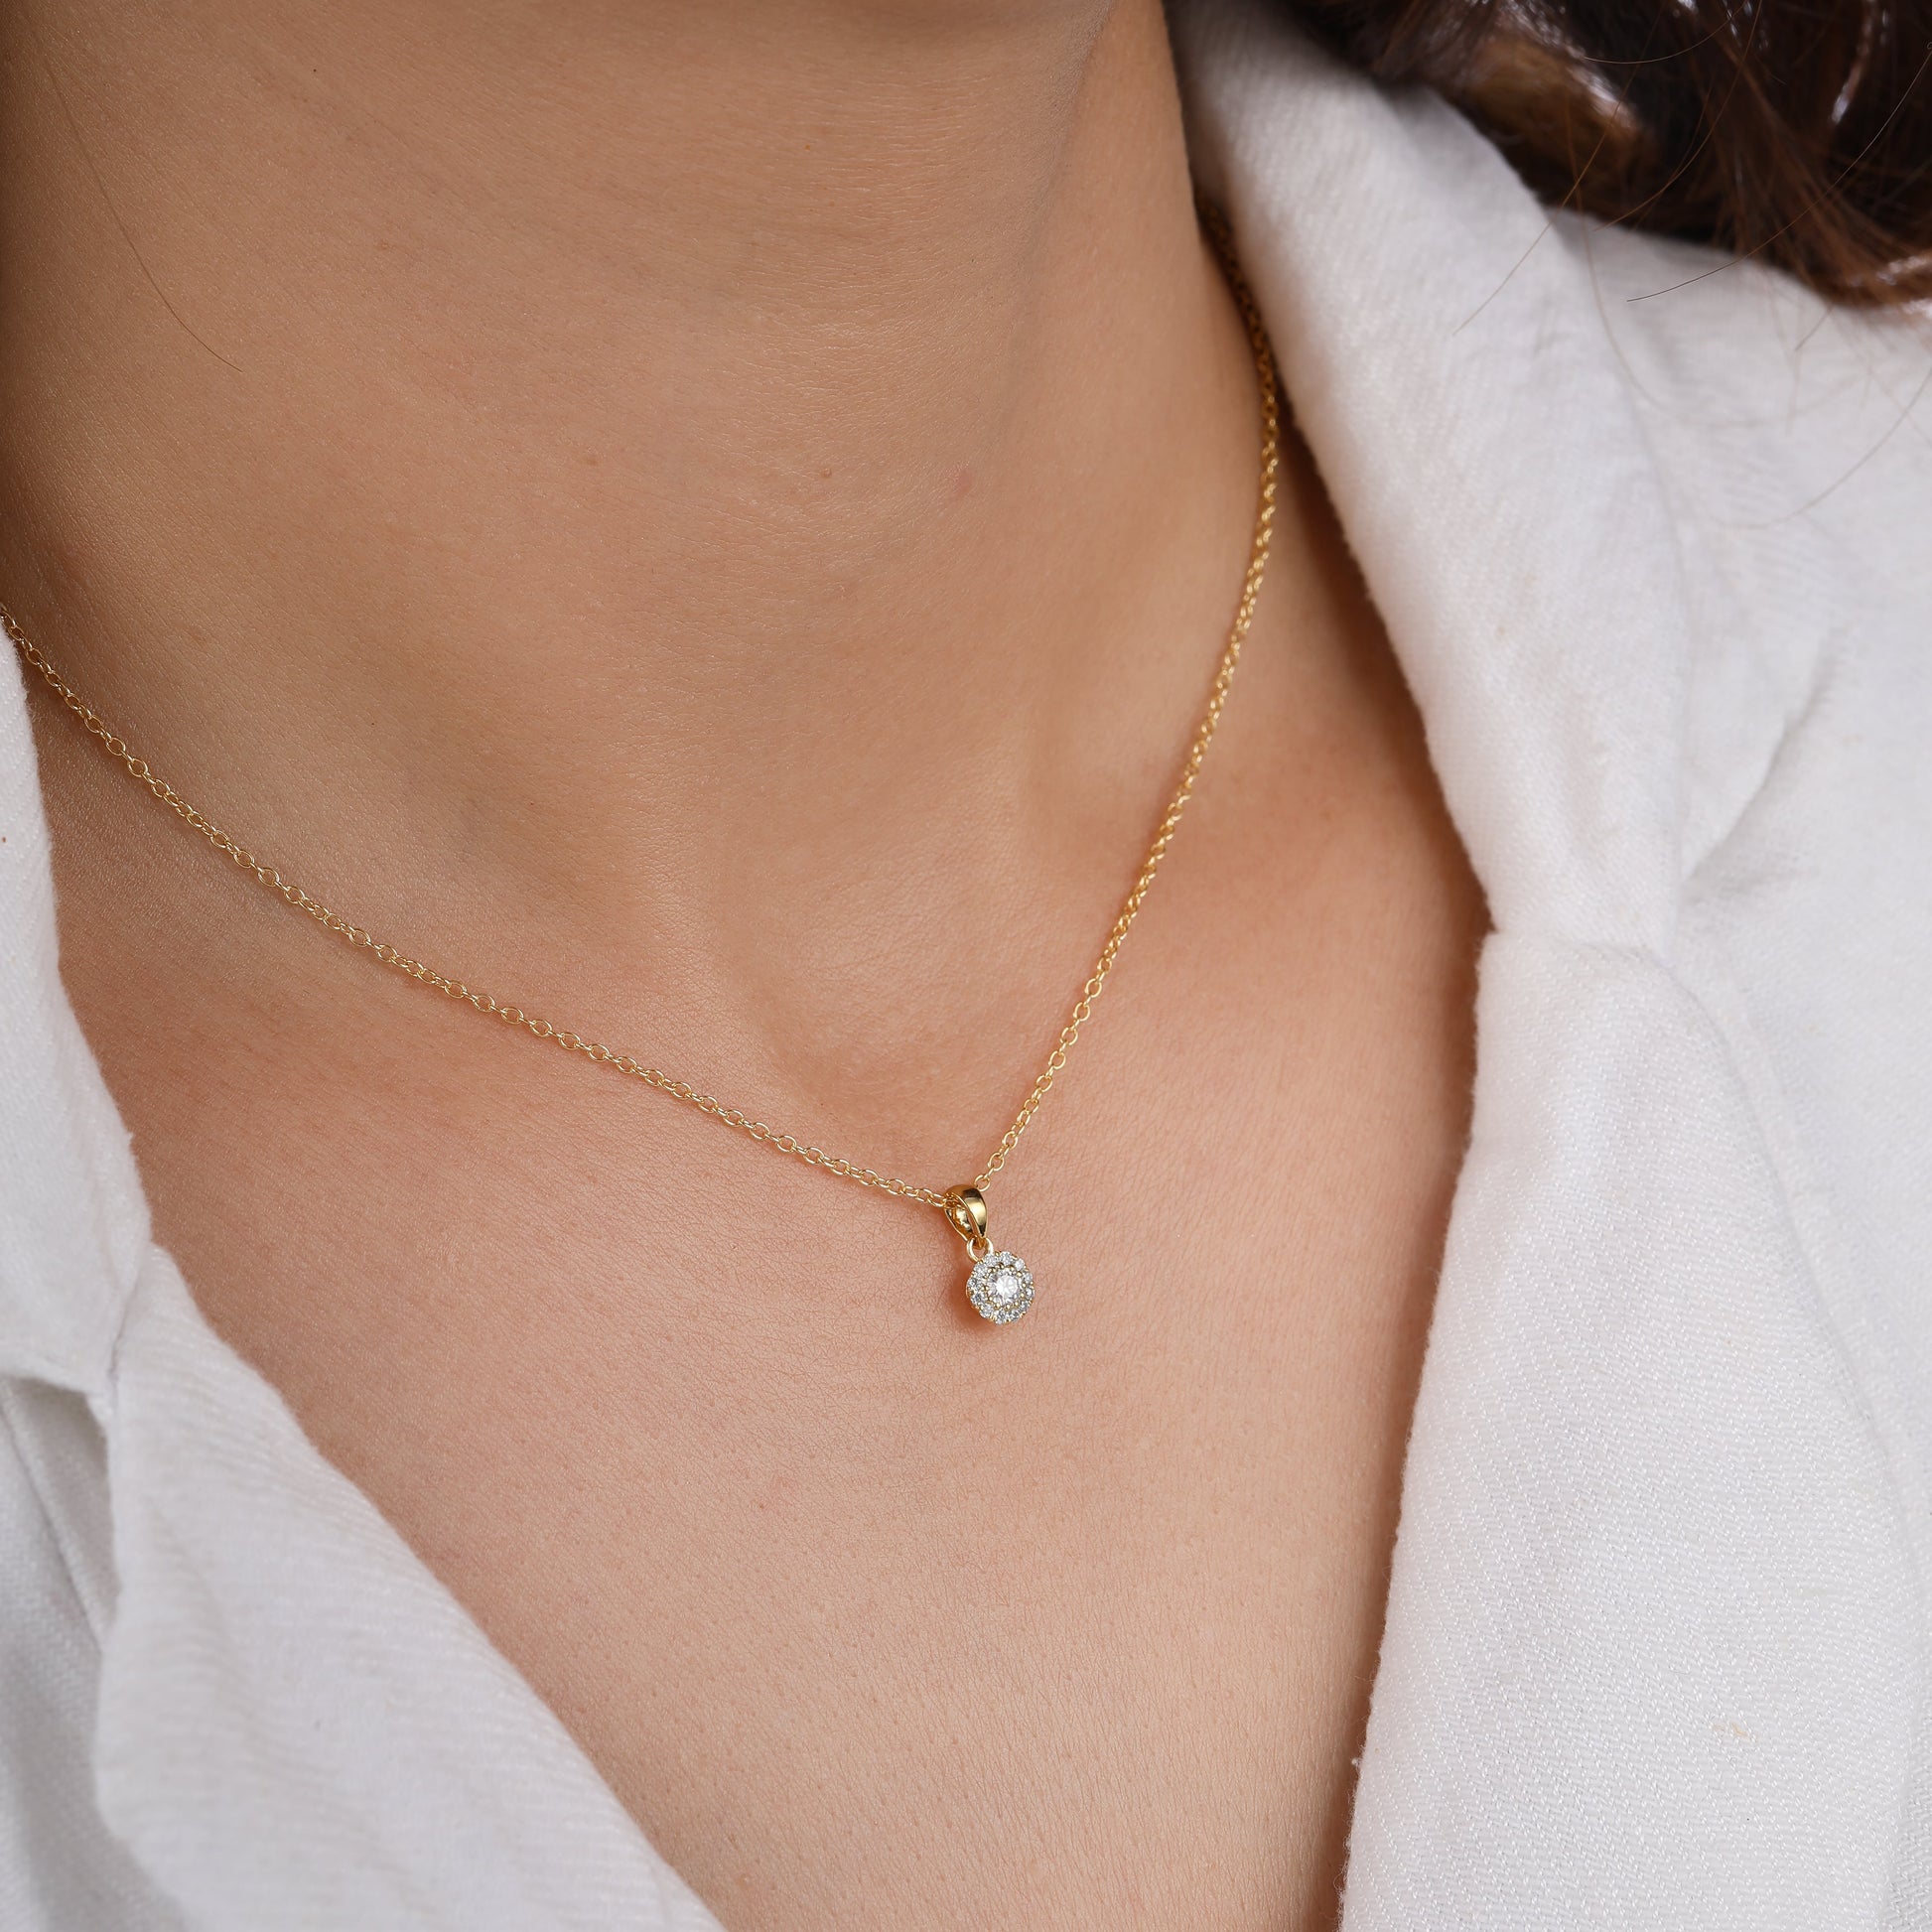 Halo Necklace for her